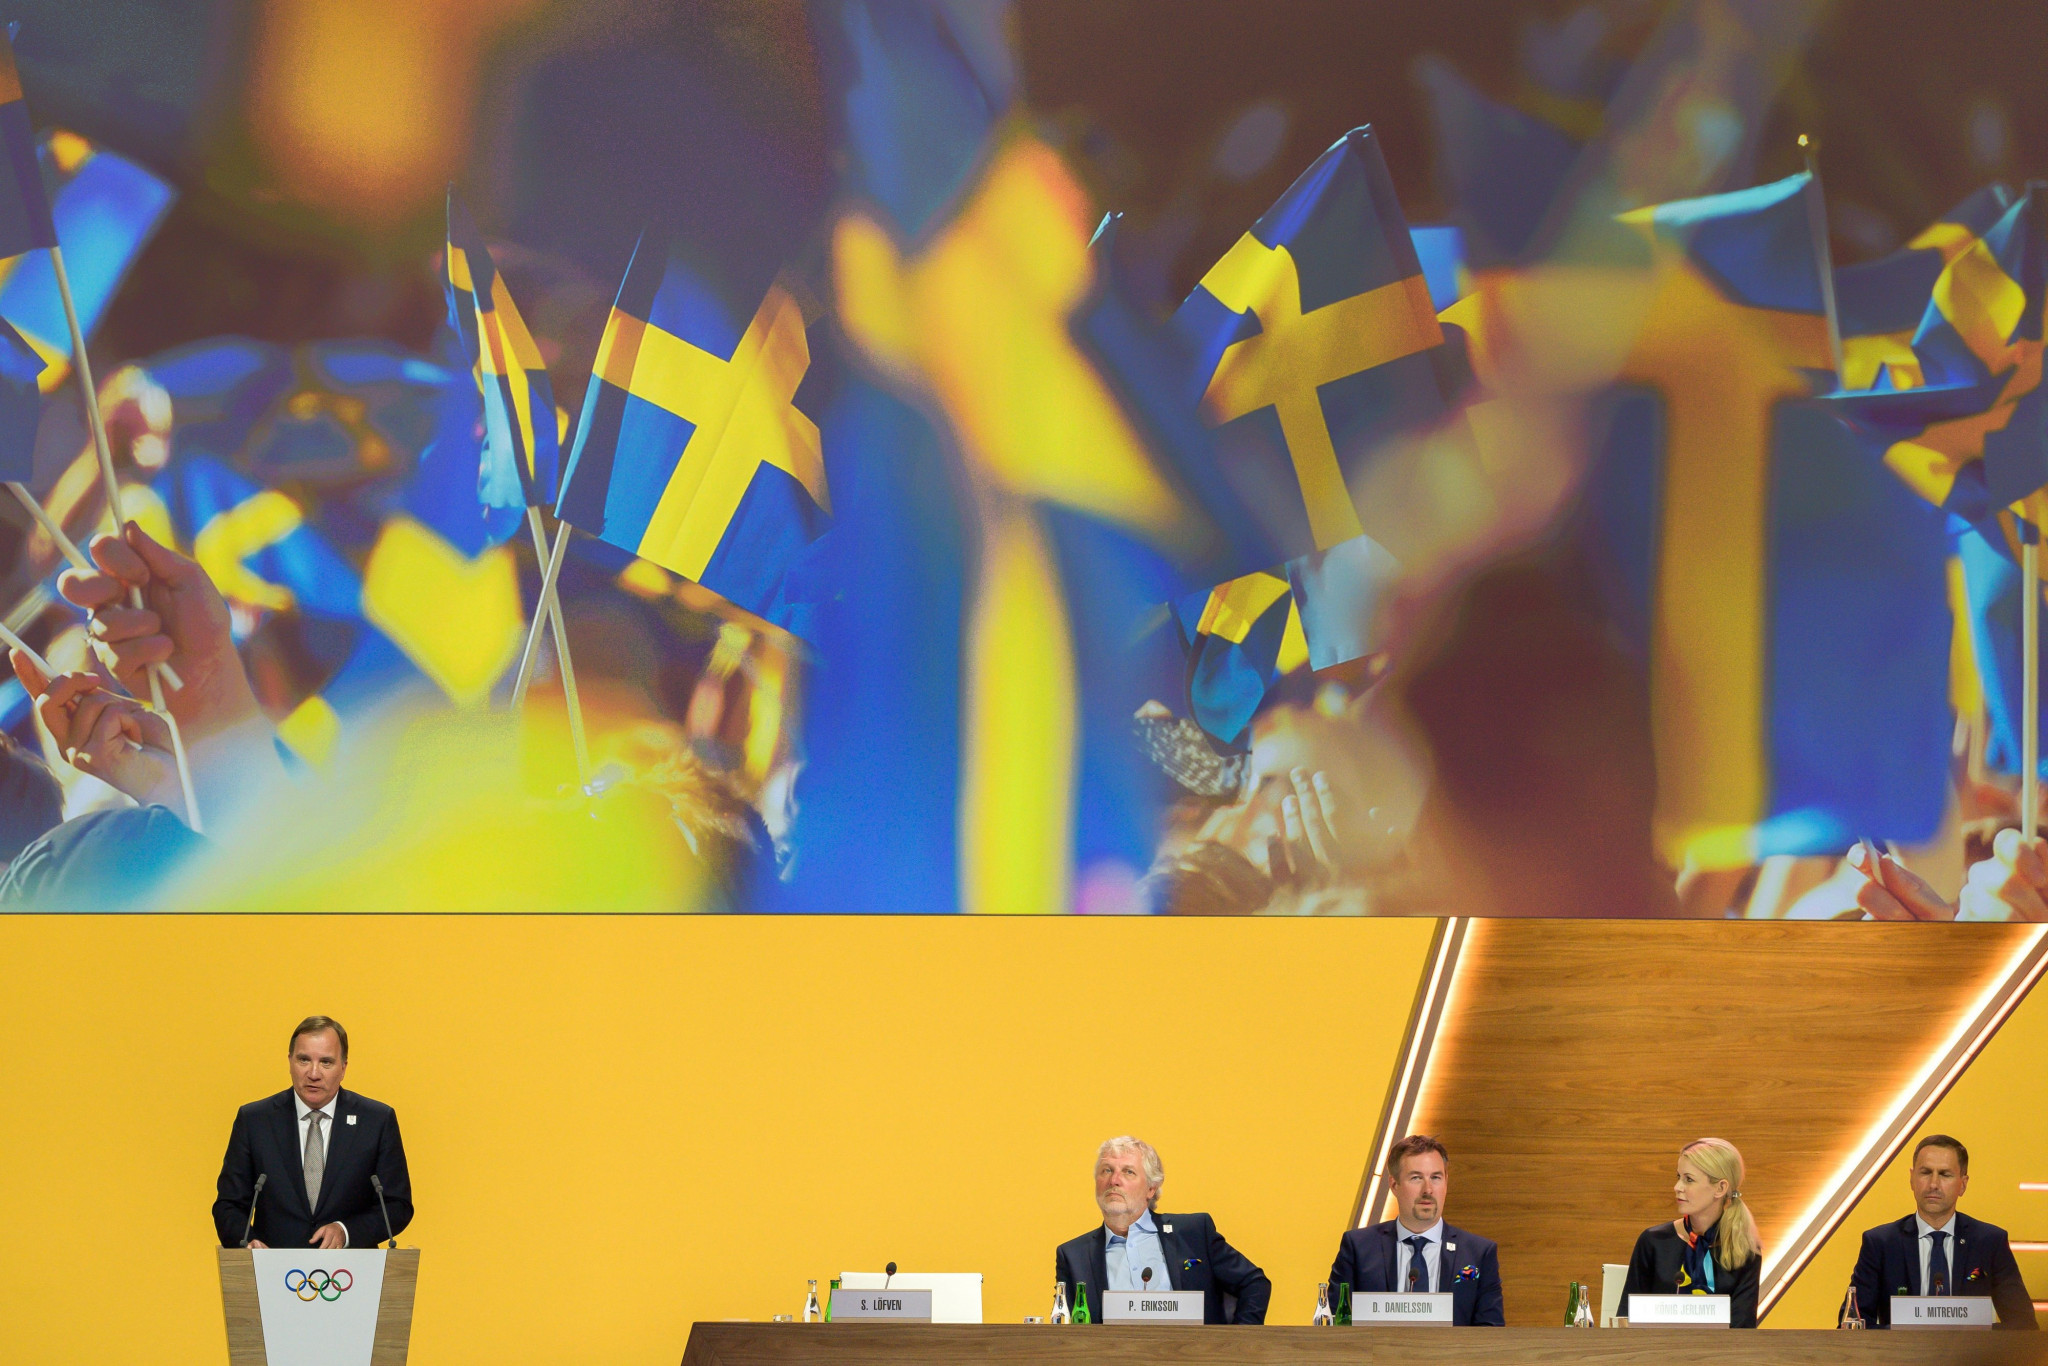 Sweden's then Prime Minister Stefan Lofven presented the country's last bid in 2019 only to lose to Milan and Cortina d'Ampezzo ©Getty Images